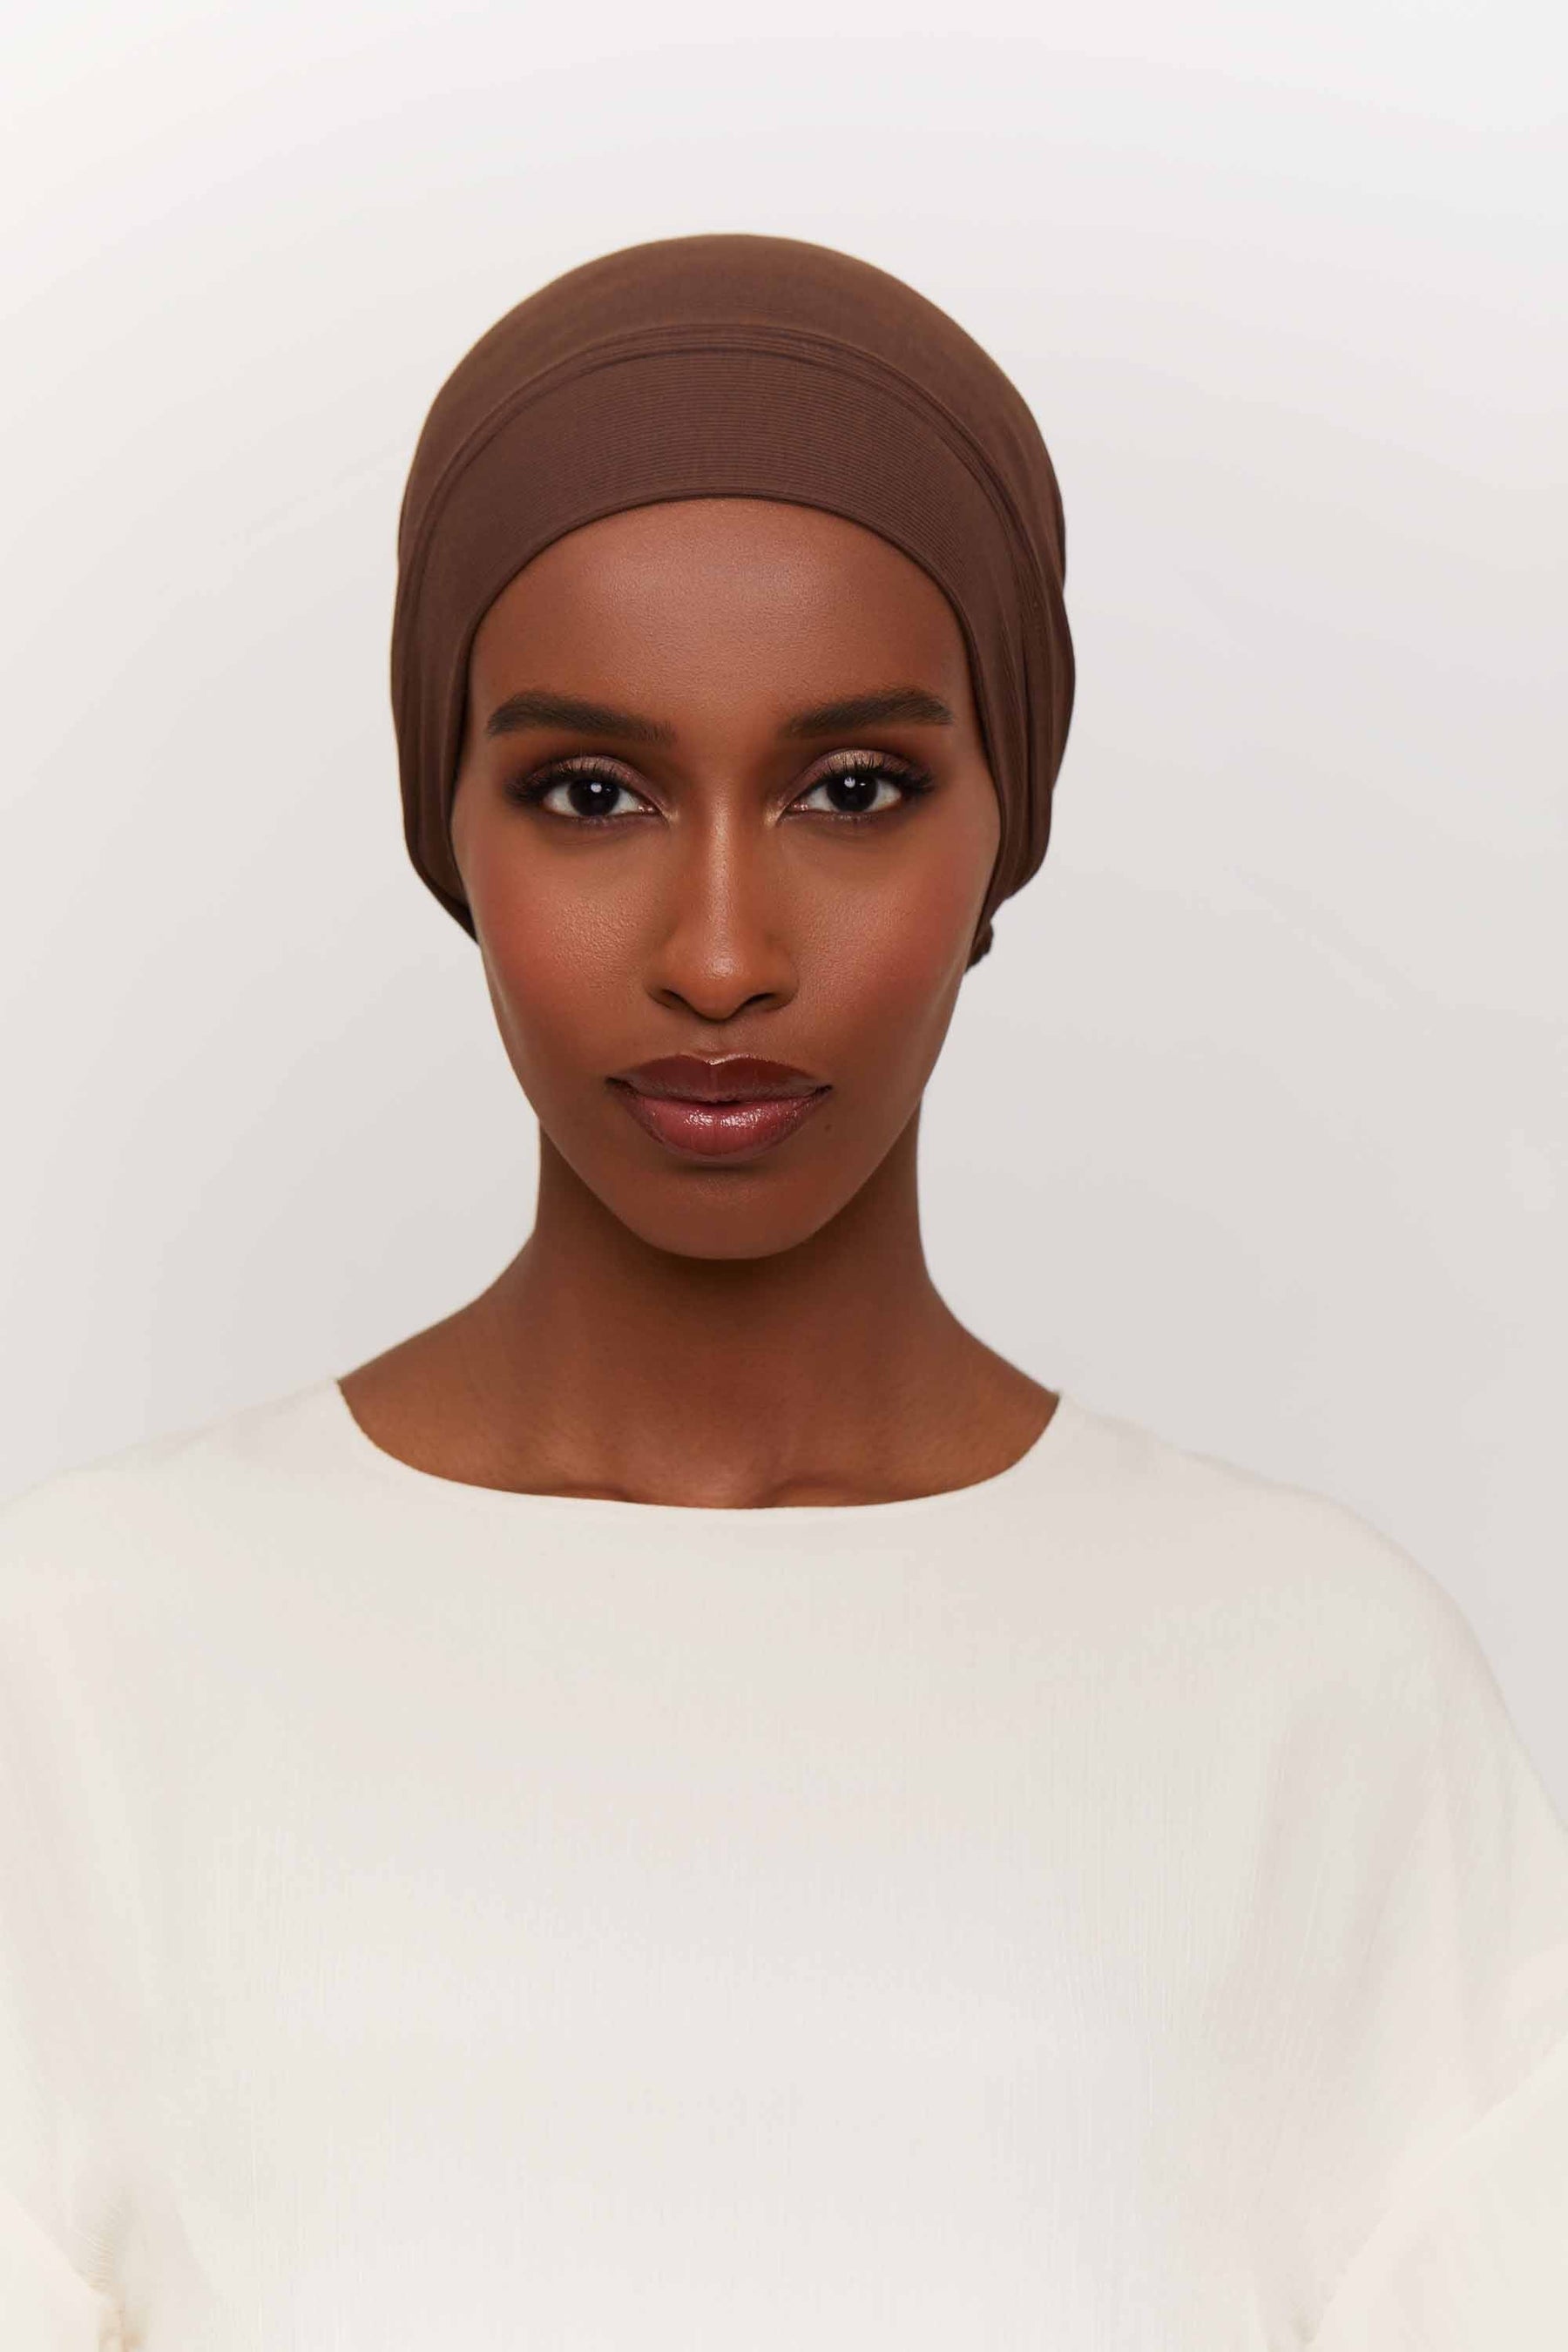 Ribbed Tie Back Undercap - Java Extra Small Accessories Veiled 